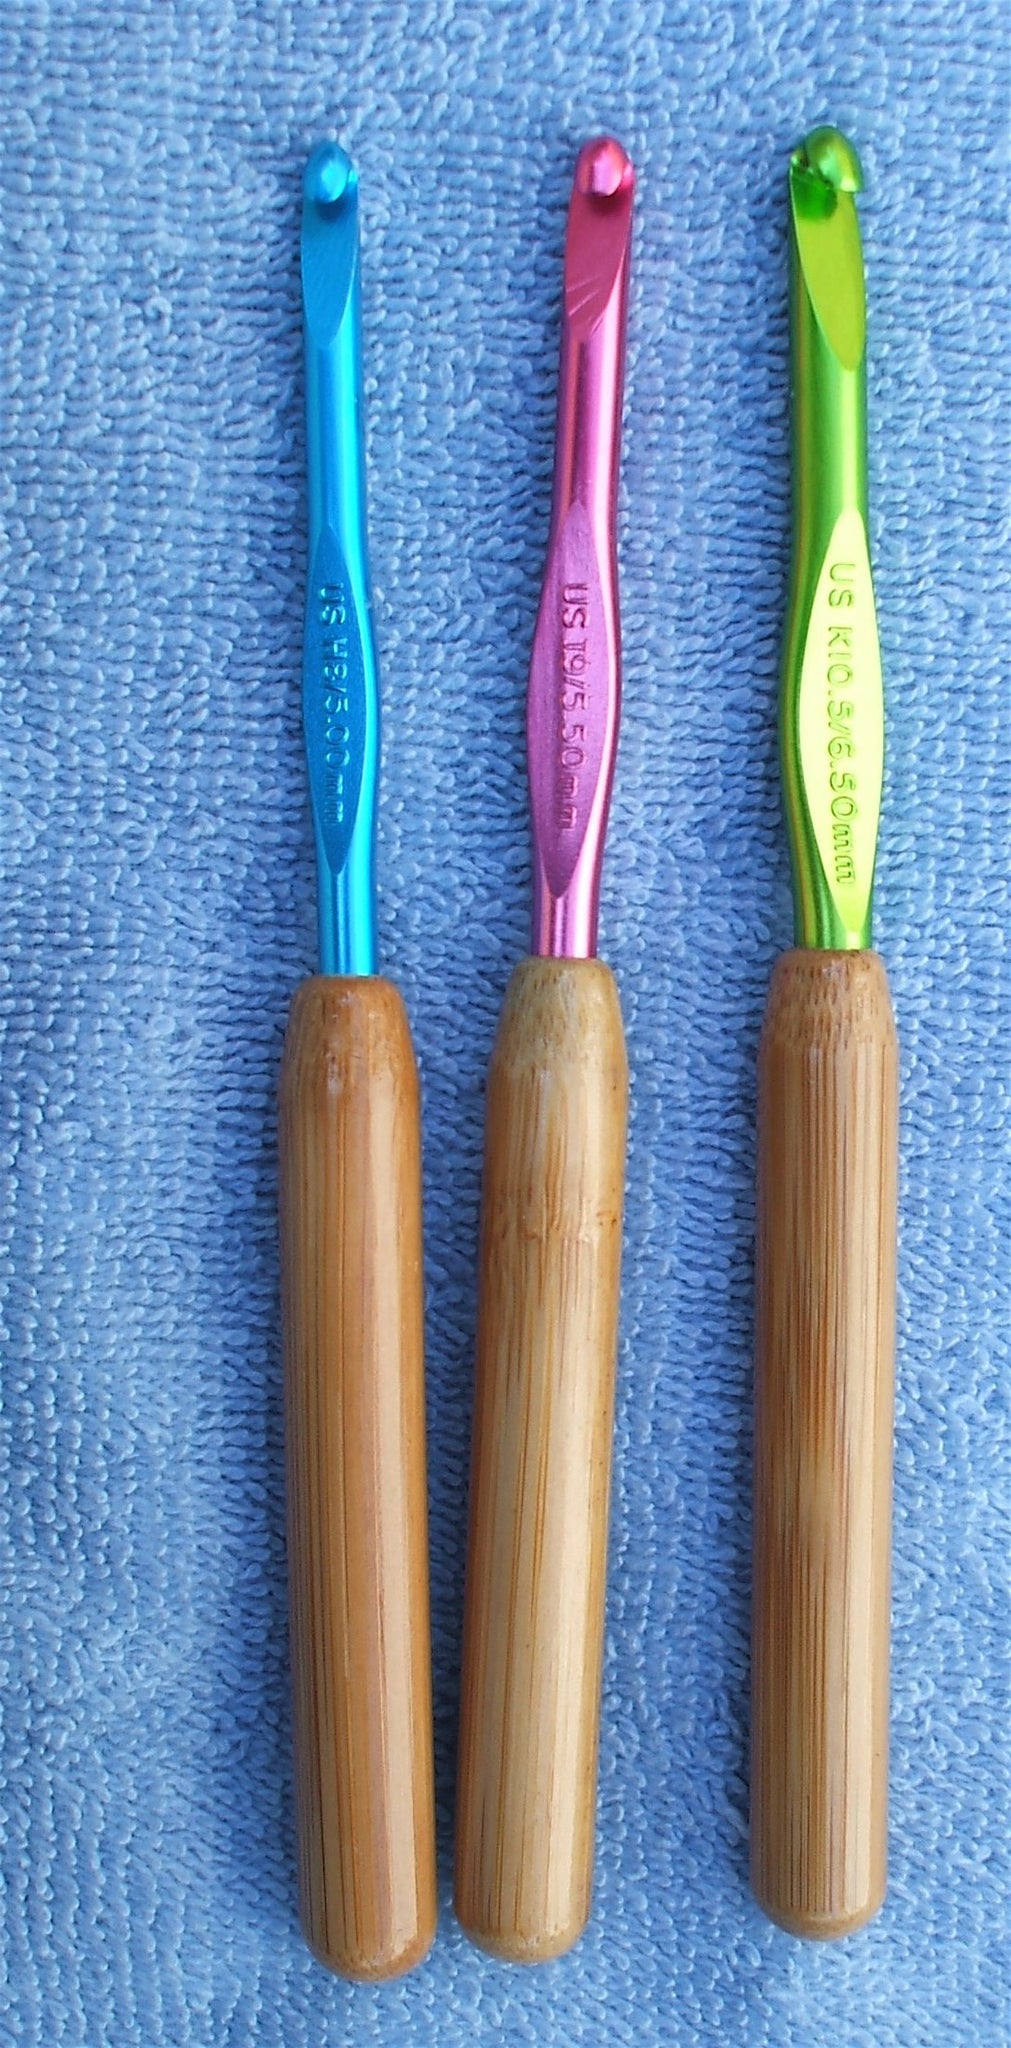 Crochet Hooks with Bamboo Handle 9mm Size M – Ewenited Stitches